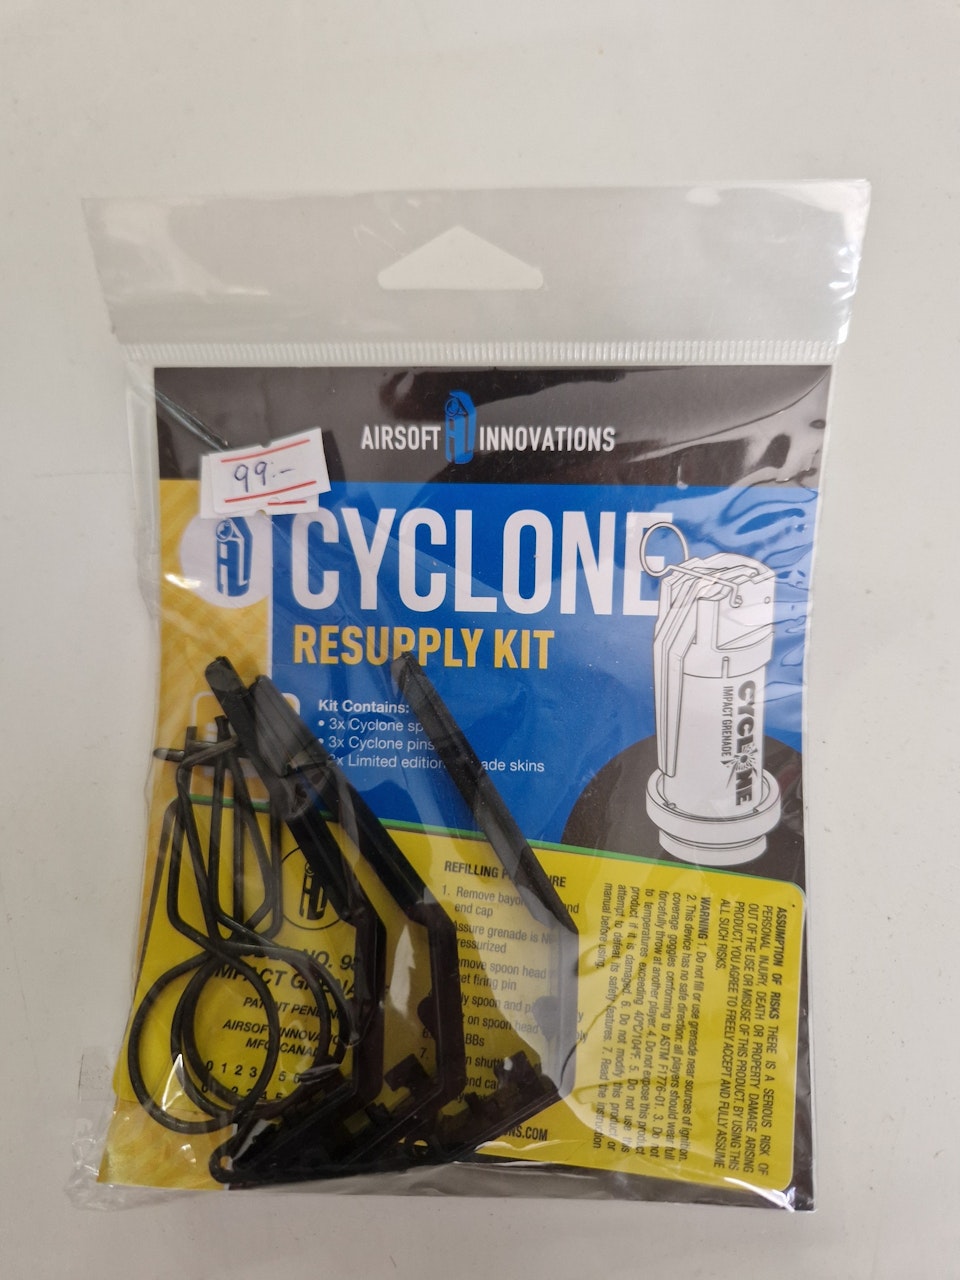 CYCLONE RESUPPLY KIT (Airsoft Innovations)